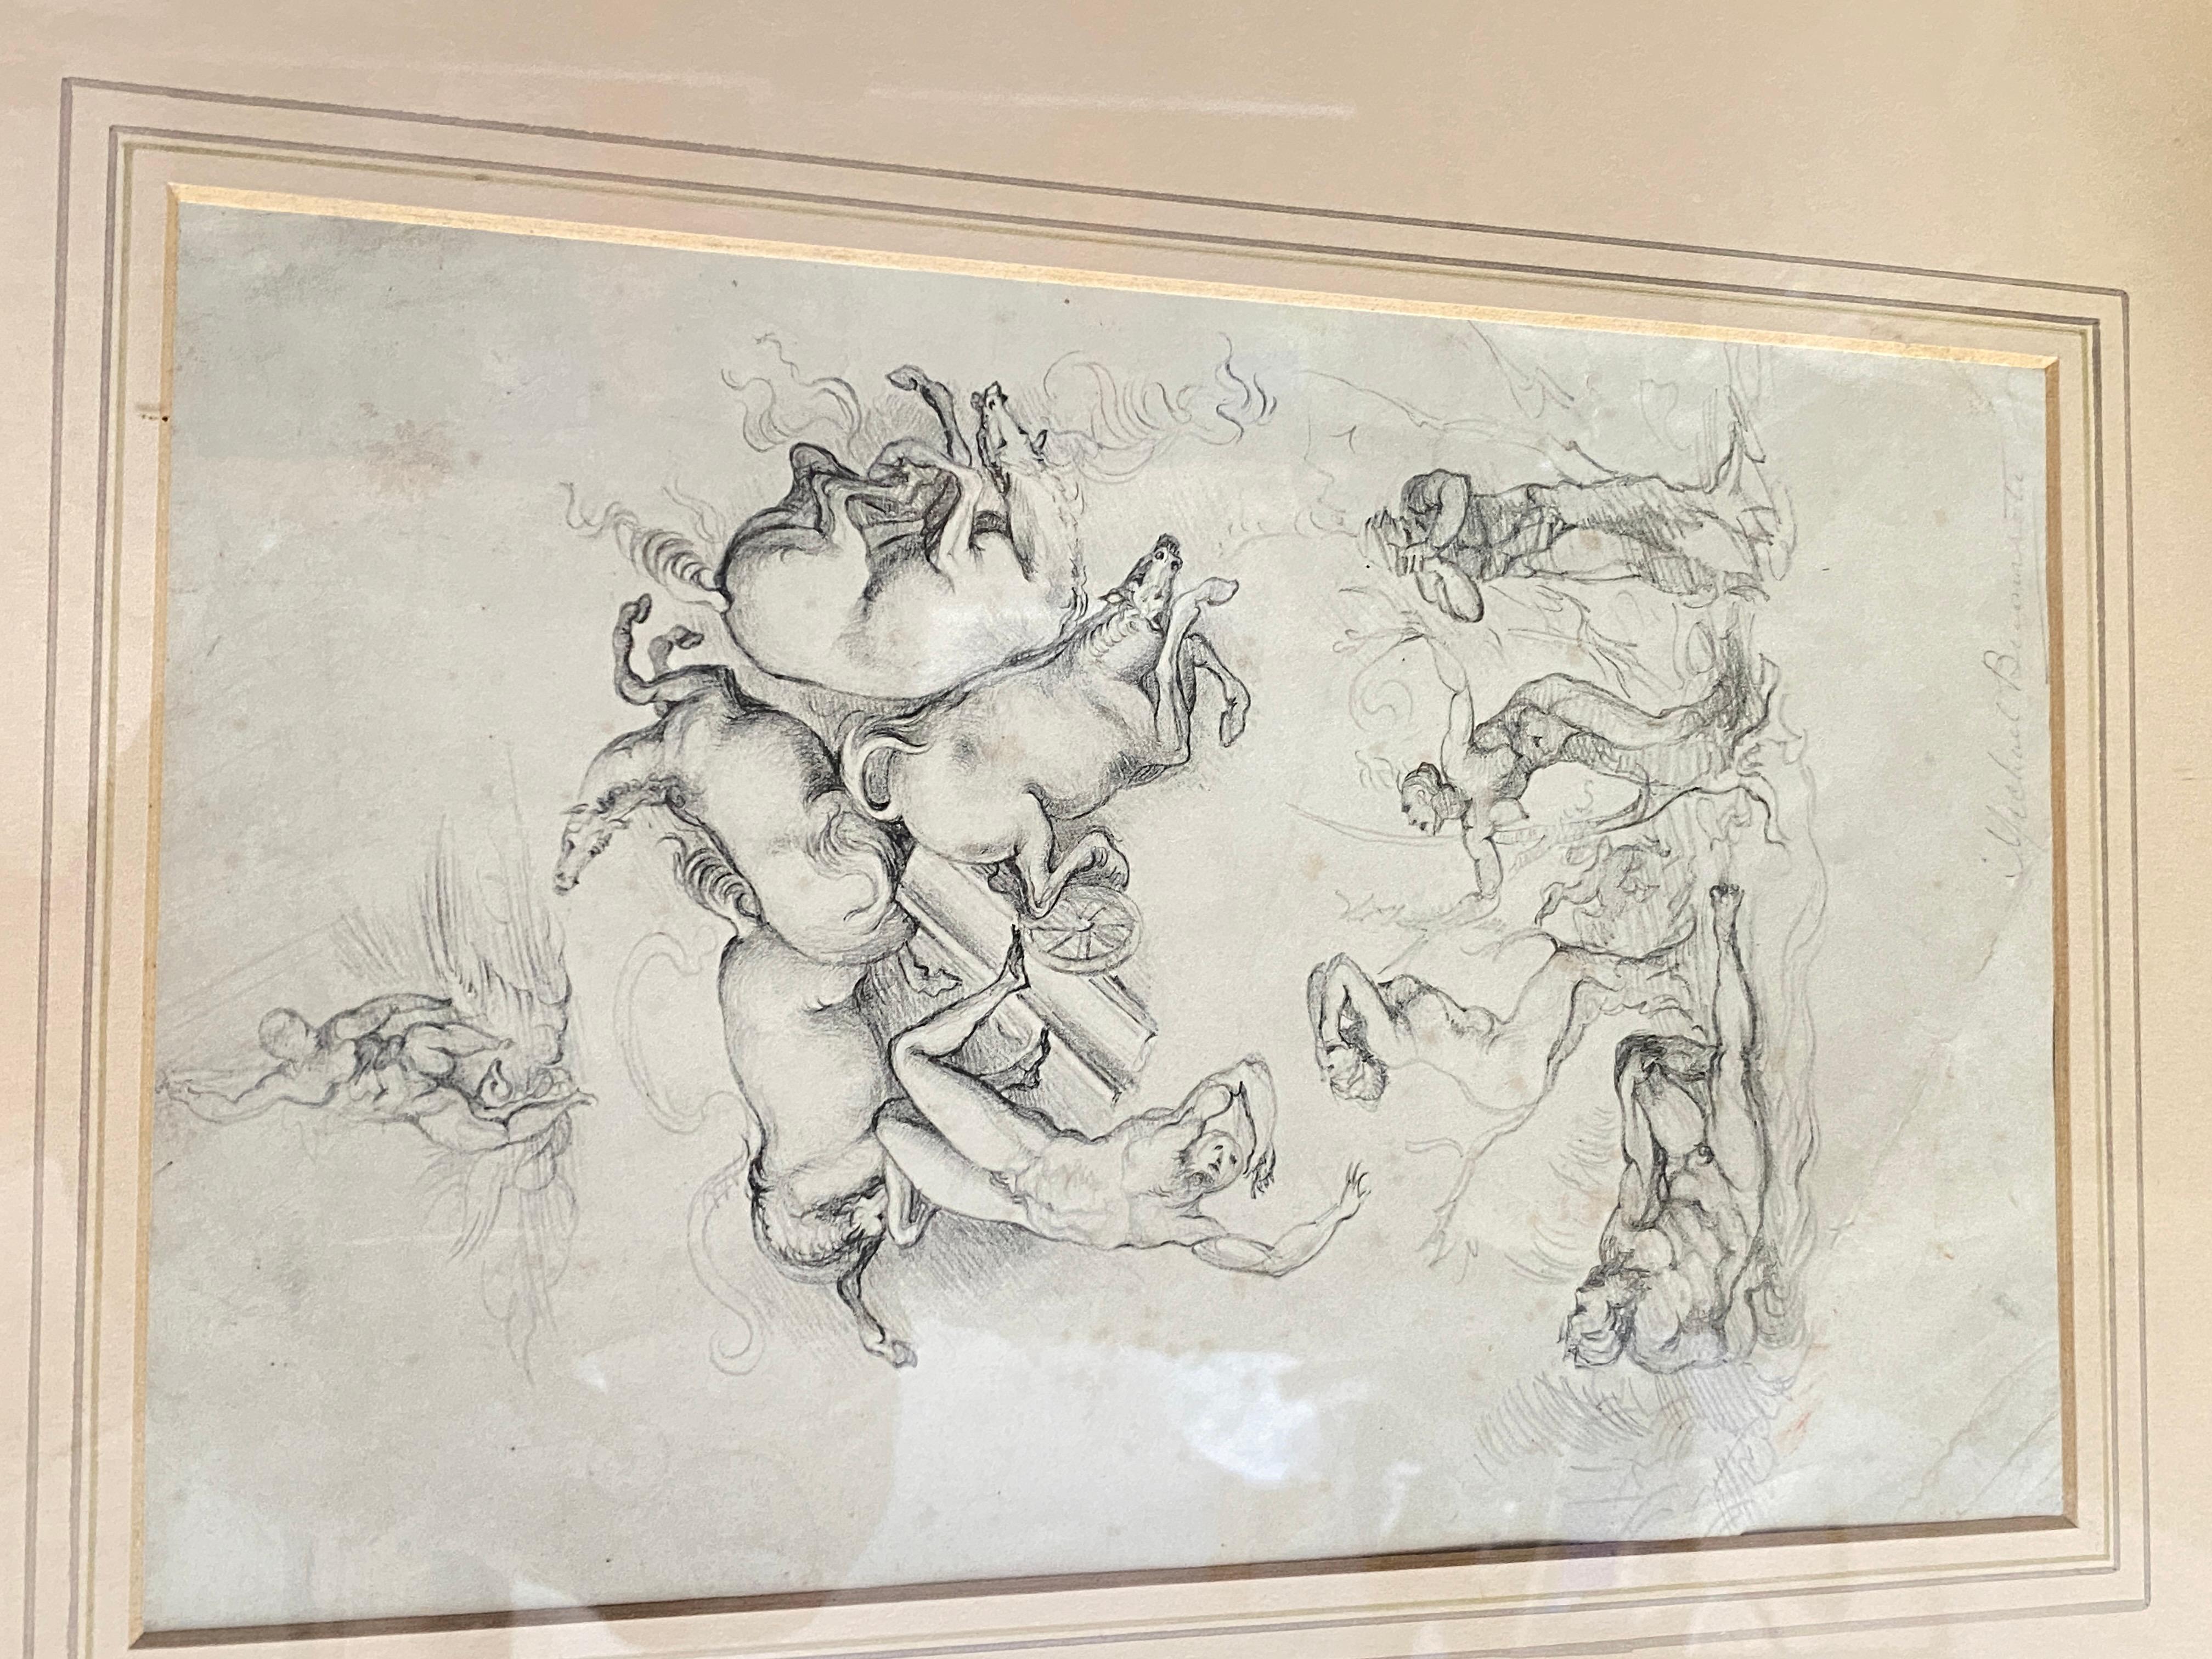 This drawing is an authentic drawing framed in a gilded wooden frame, and placed under a Marie-Louise. It is an authentic drawing from the 19th century made in France, by an artist who took up a drawing by Michelangelo, to make his own